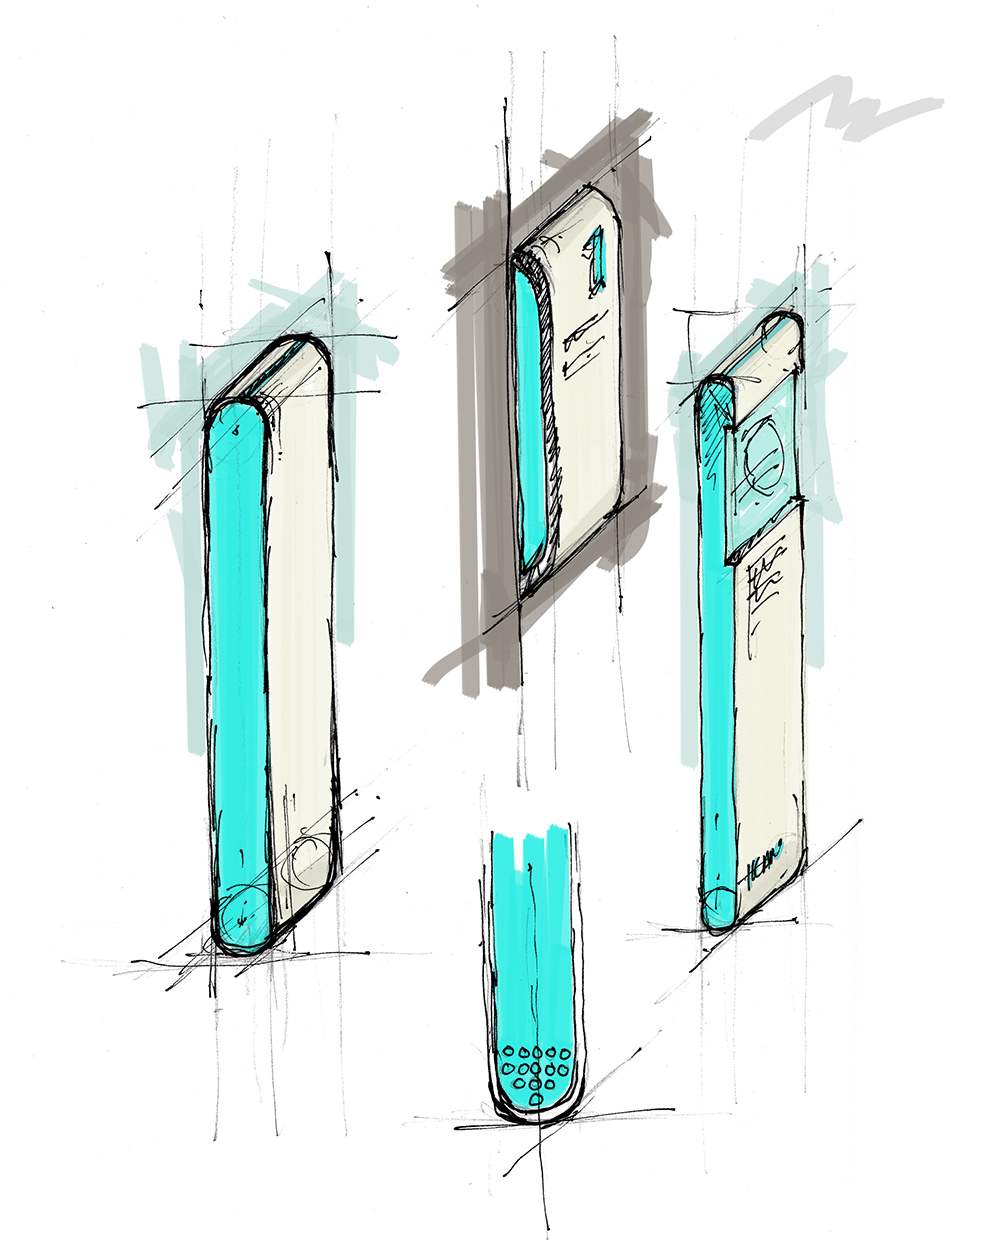 Signage sketches for Ikano Shopping Centre in Malaysia